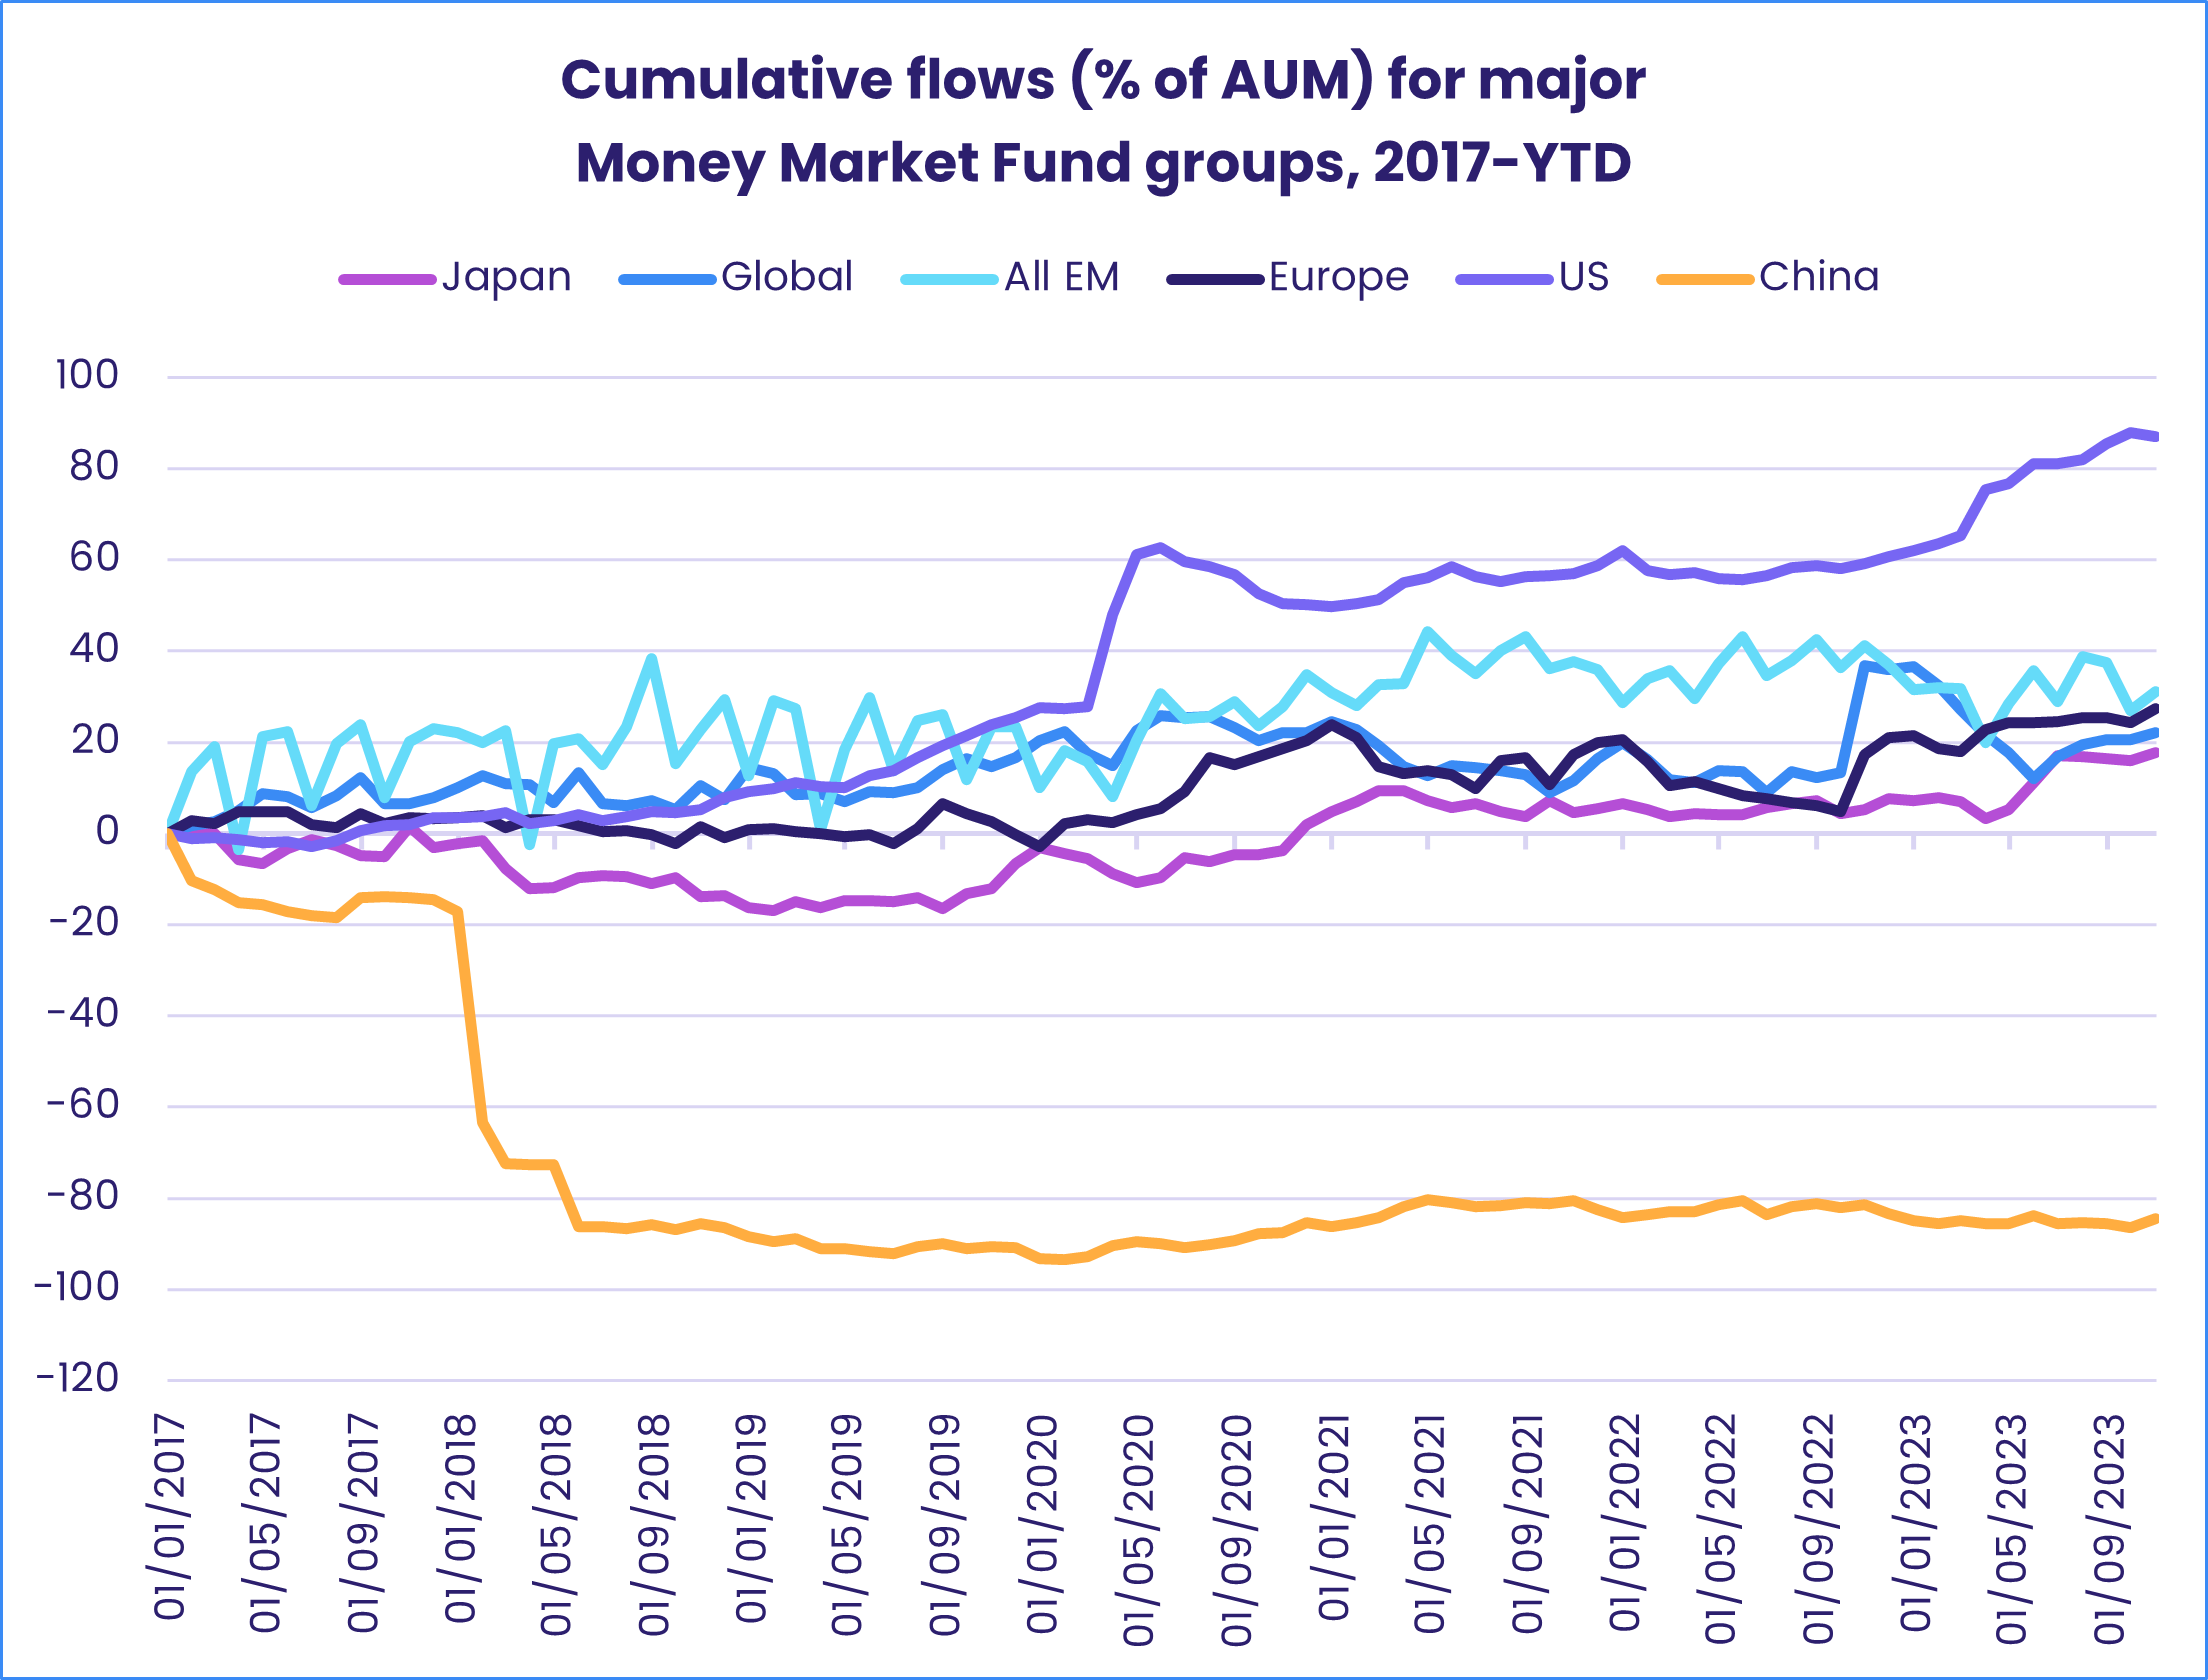 Image of a chart representing "Cumulative flows (% of AUM) for major Money Market Fund groups, 2017-YTD"